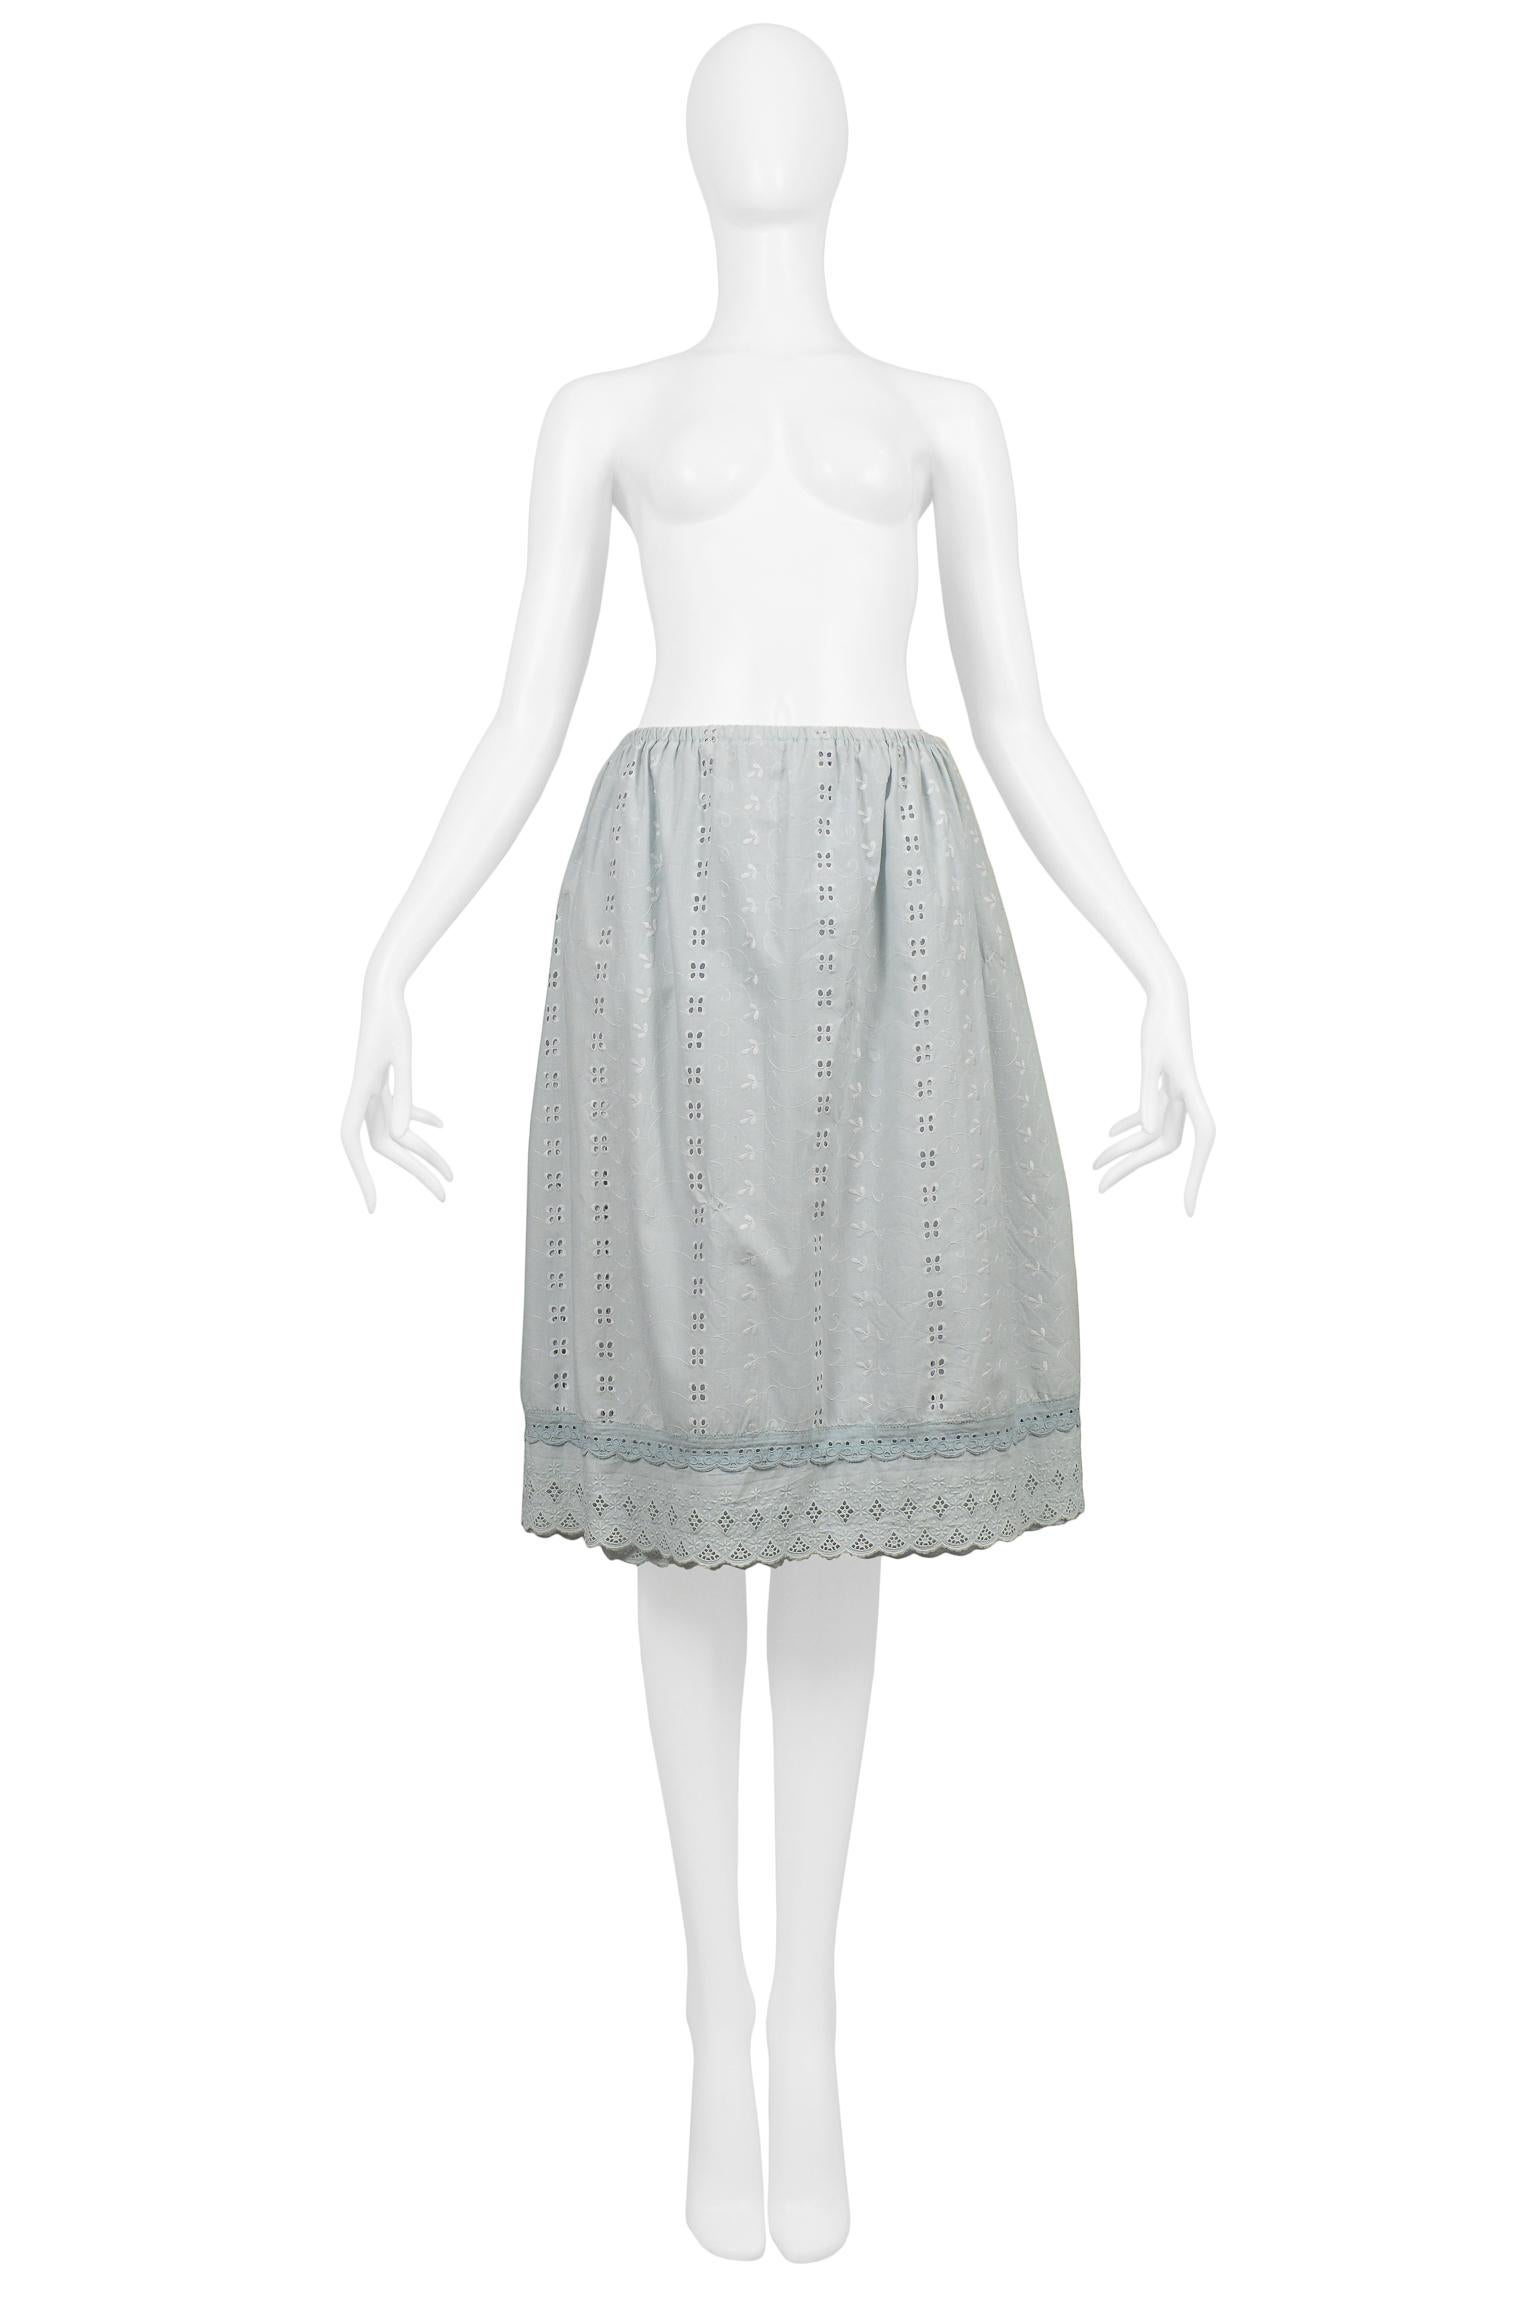 Resurrection Vintage is excited to offer a vintage Maison Martin Margiela light blue eyelet lace artisanal skirt made from two vintage lace skirts, one side is covered in a light blue eyelet pattern and the other side in white with light blue eyelet